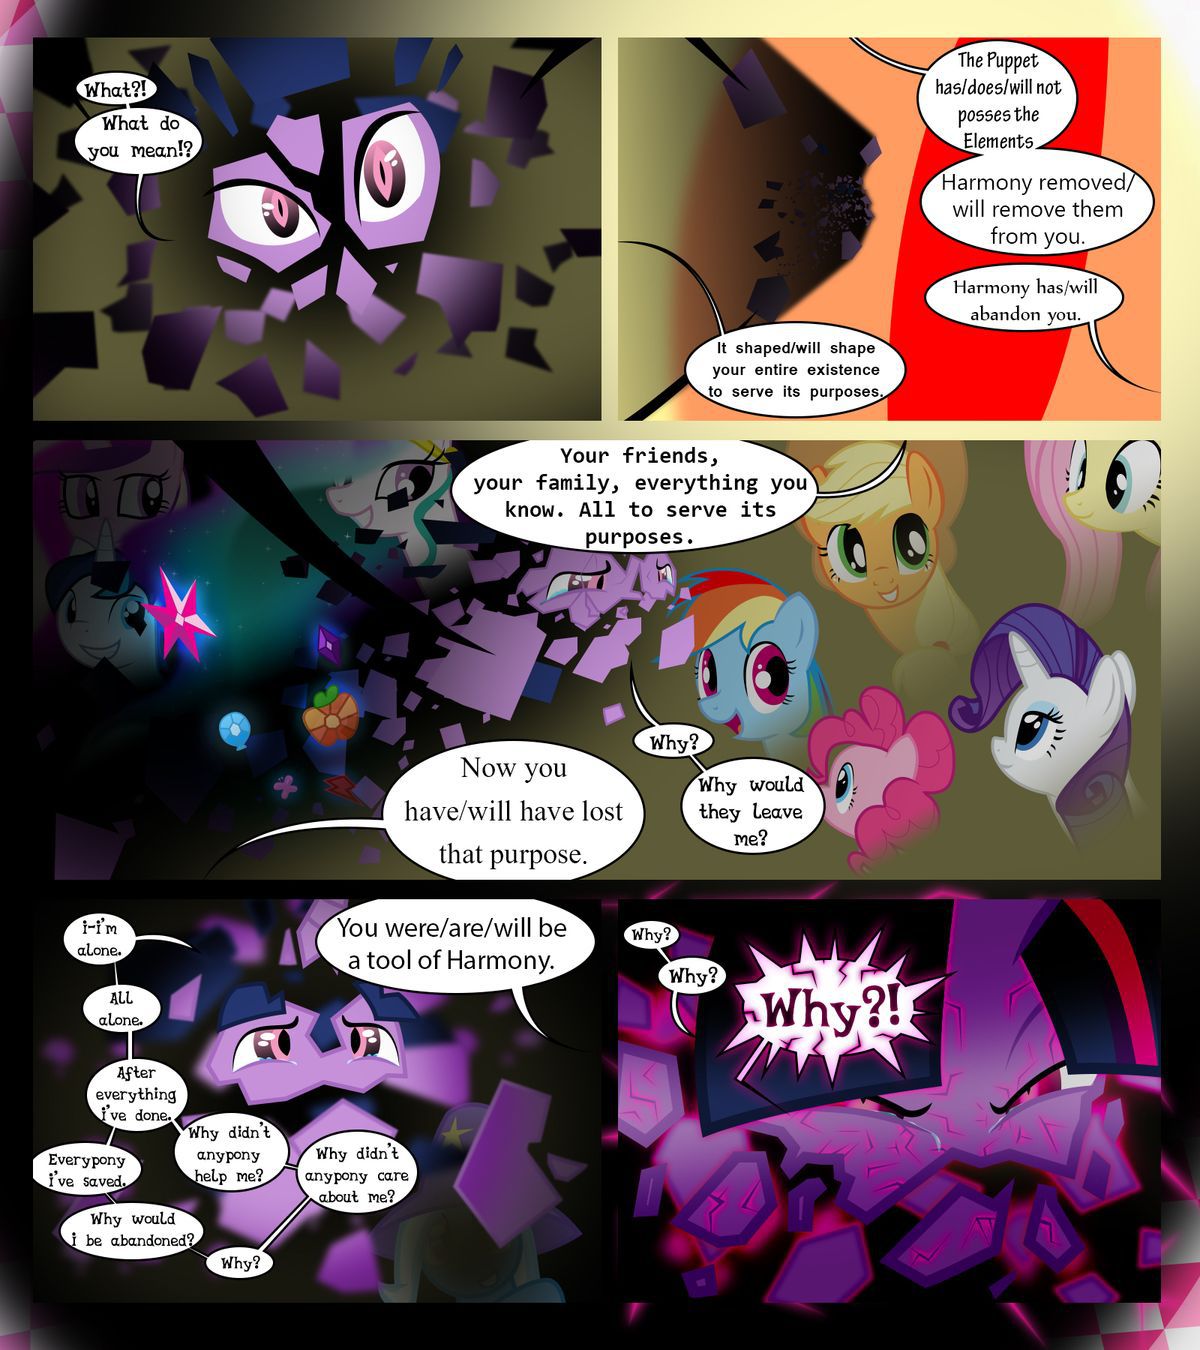 [GatesMcCloud] Cutie Mark Crusaders 10k: Chapter 3 - The Lost (My Little Pony: Friendship is Magic) [English] [Ongoing] 8